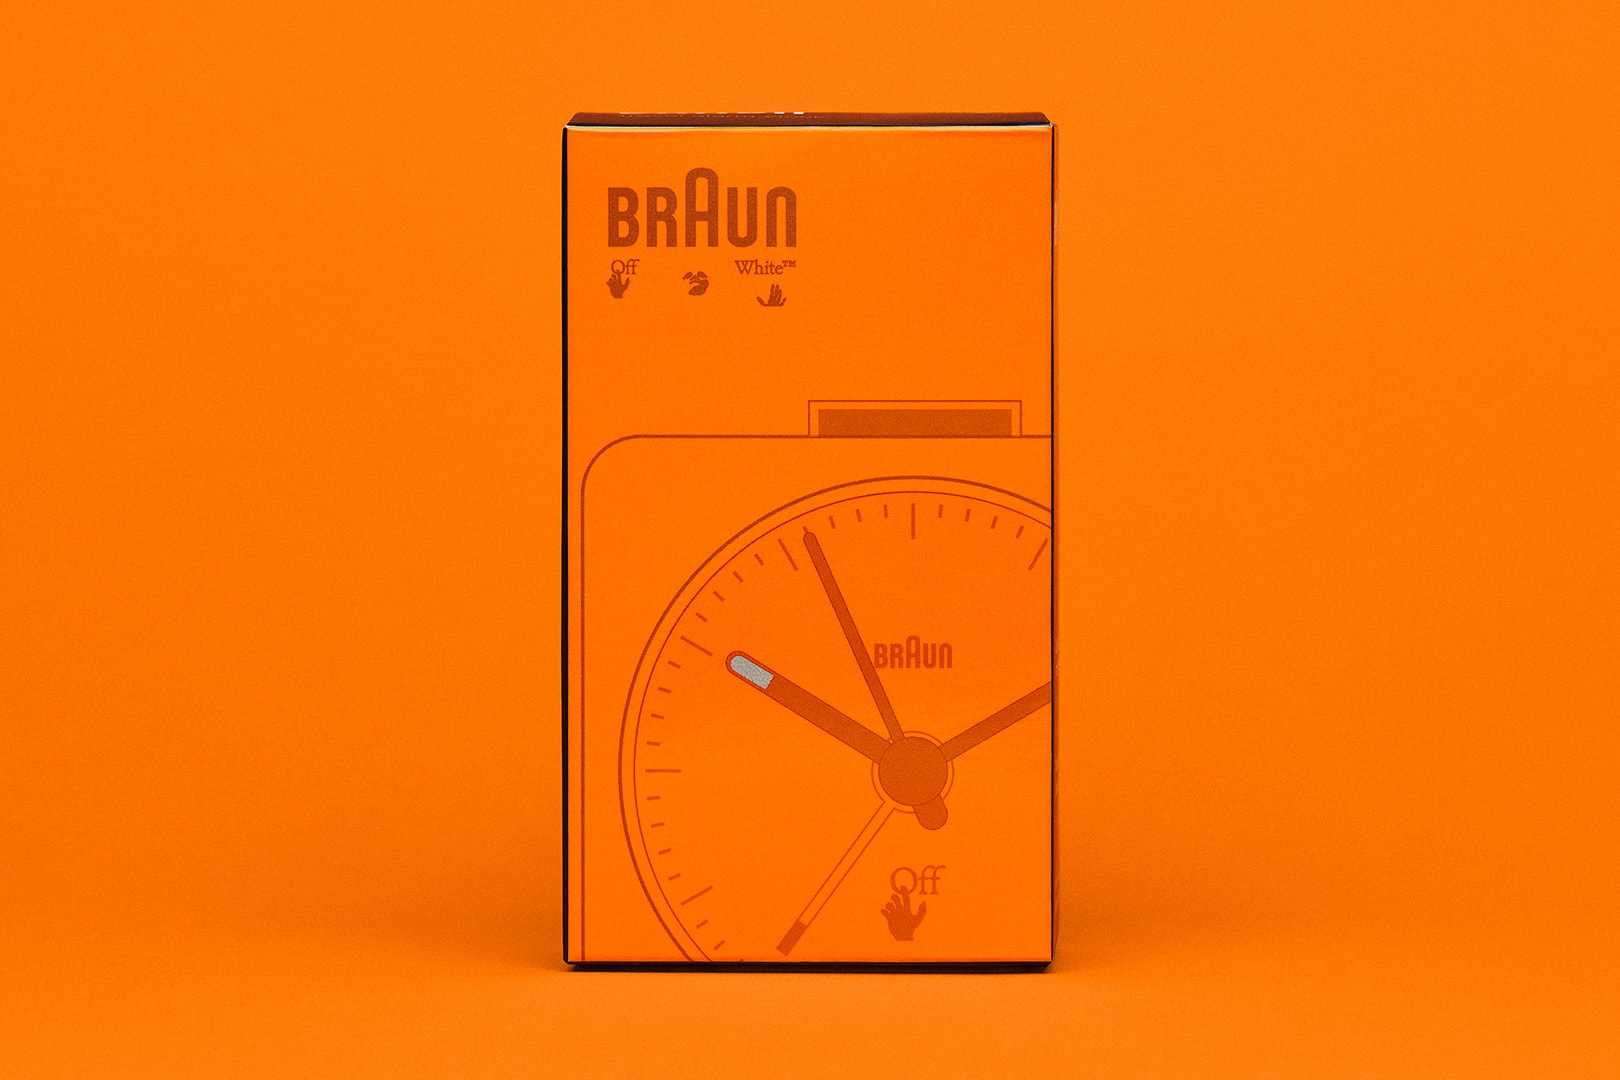 Virgil Abloh Signals Ongoing Venture With Braun With Pair of Off-White Alarm Clocks